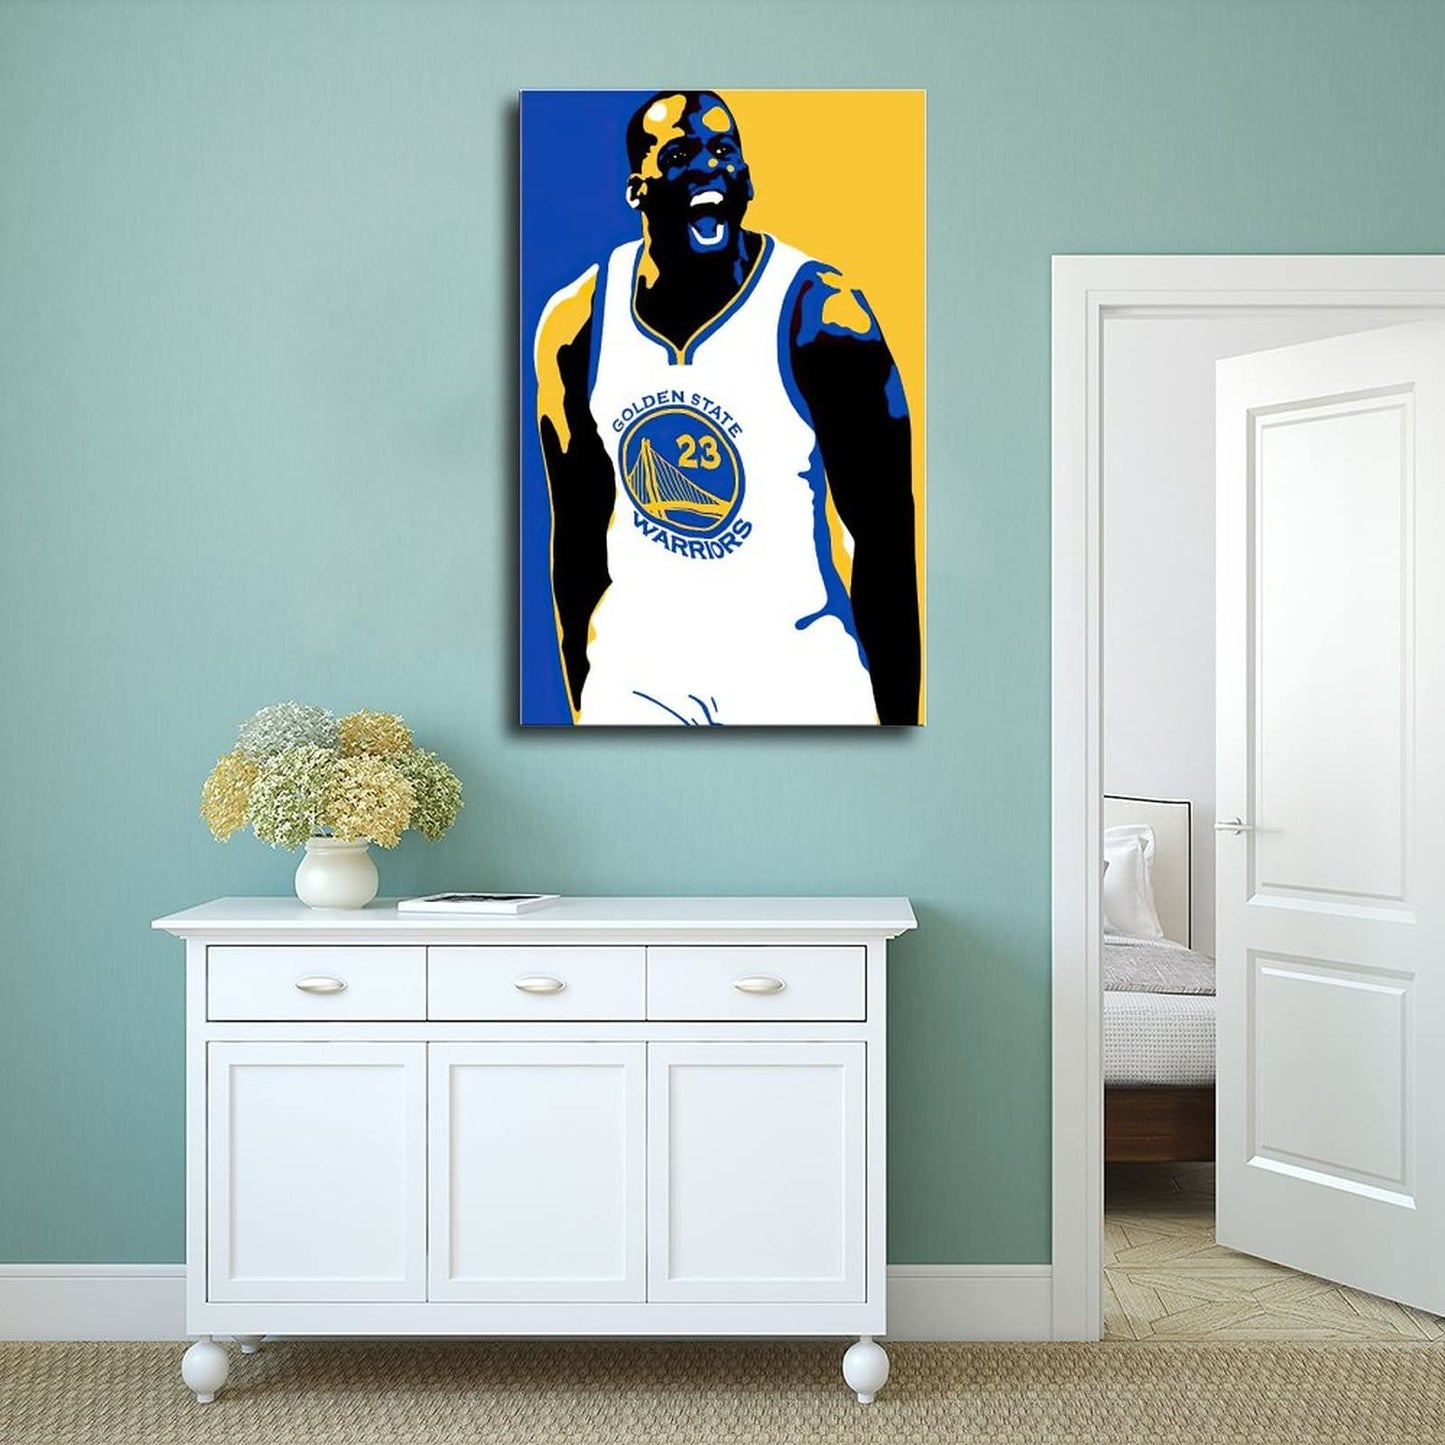 KAMUFF Draymond Green Poster Basketball Canvas Wall Art Dunking Picture Print For Boys Bedroom Unframe-style 12x18inch(30x45cm)